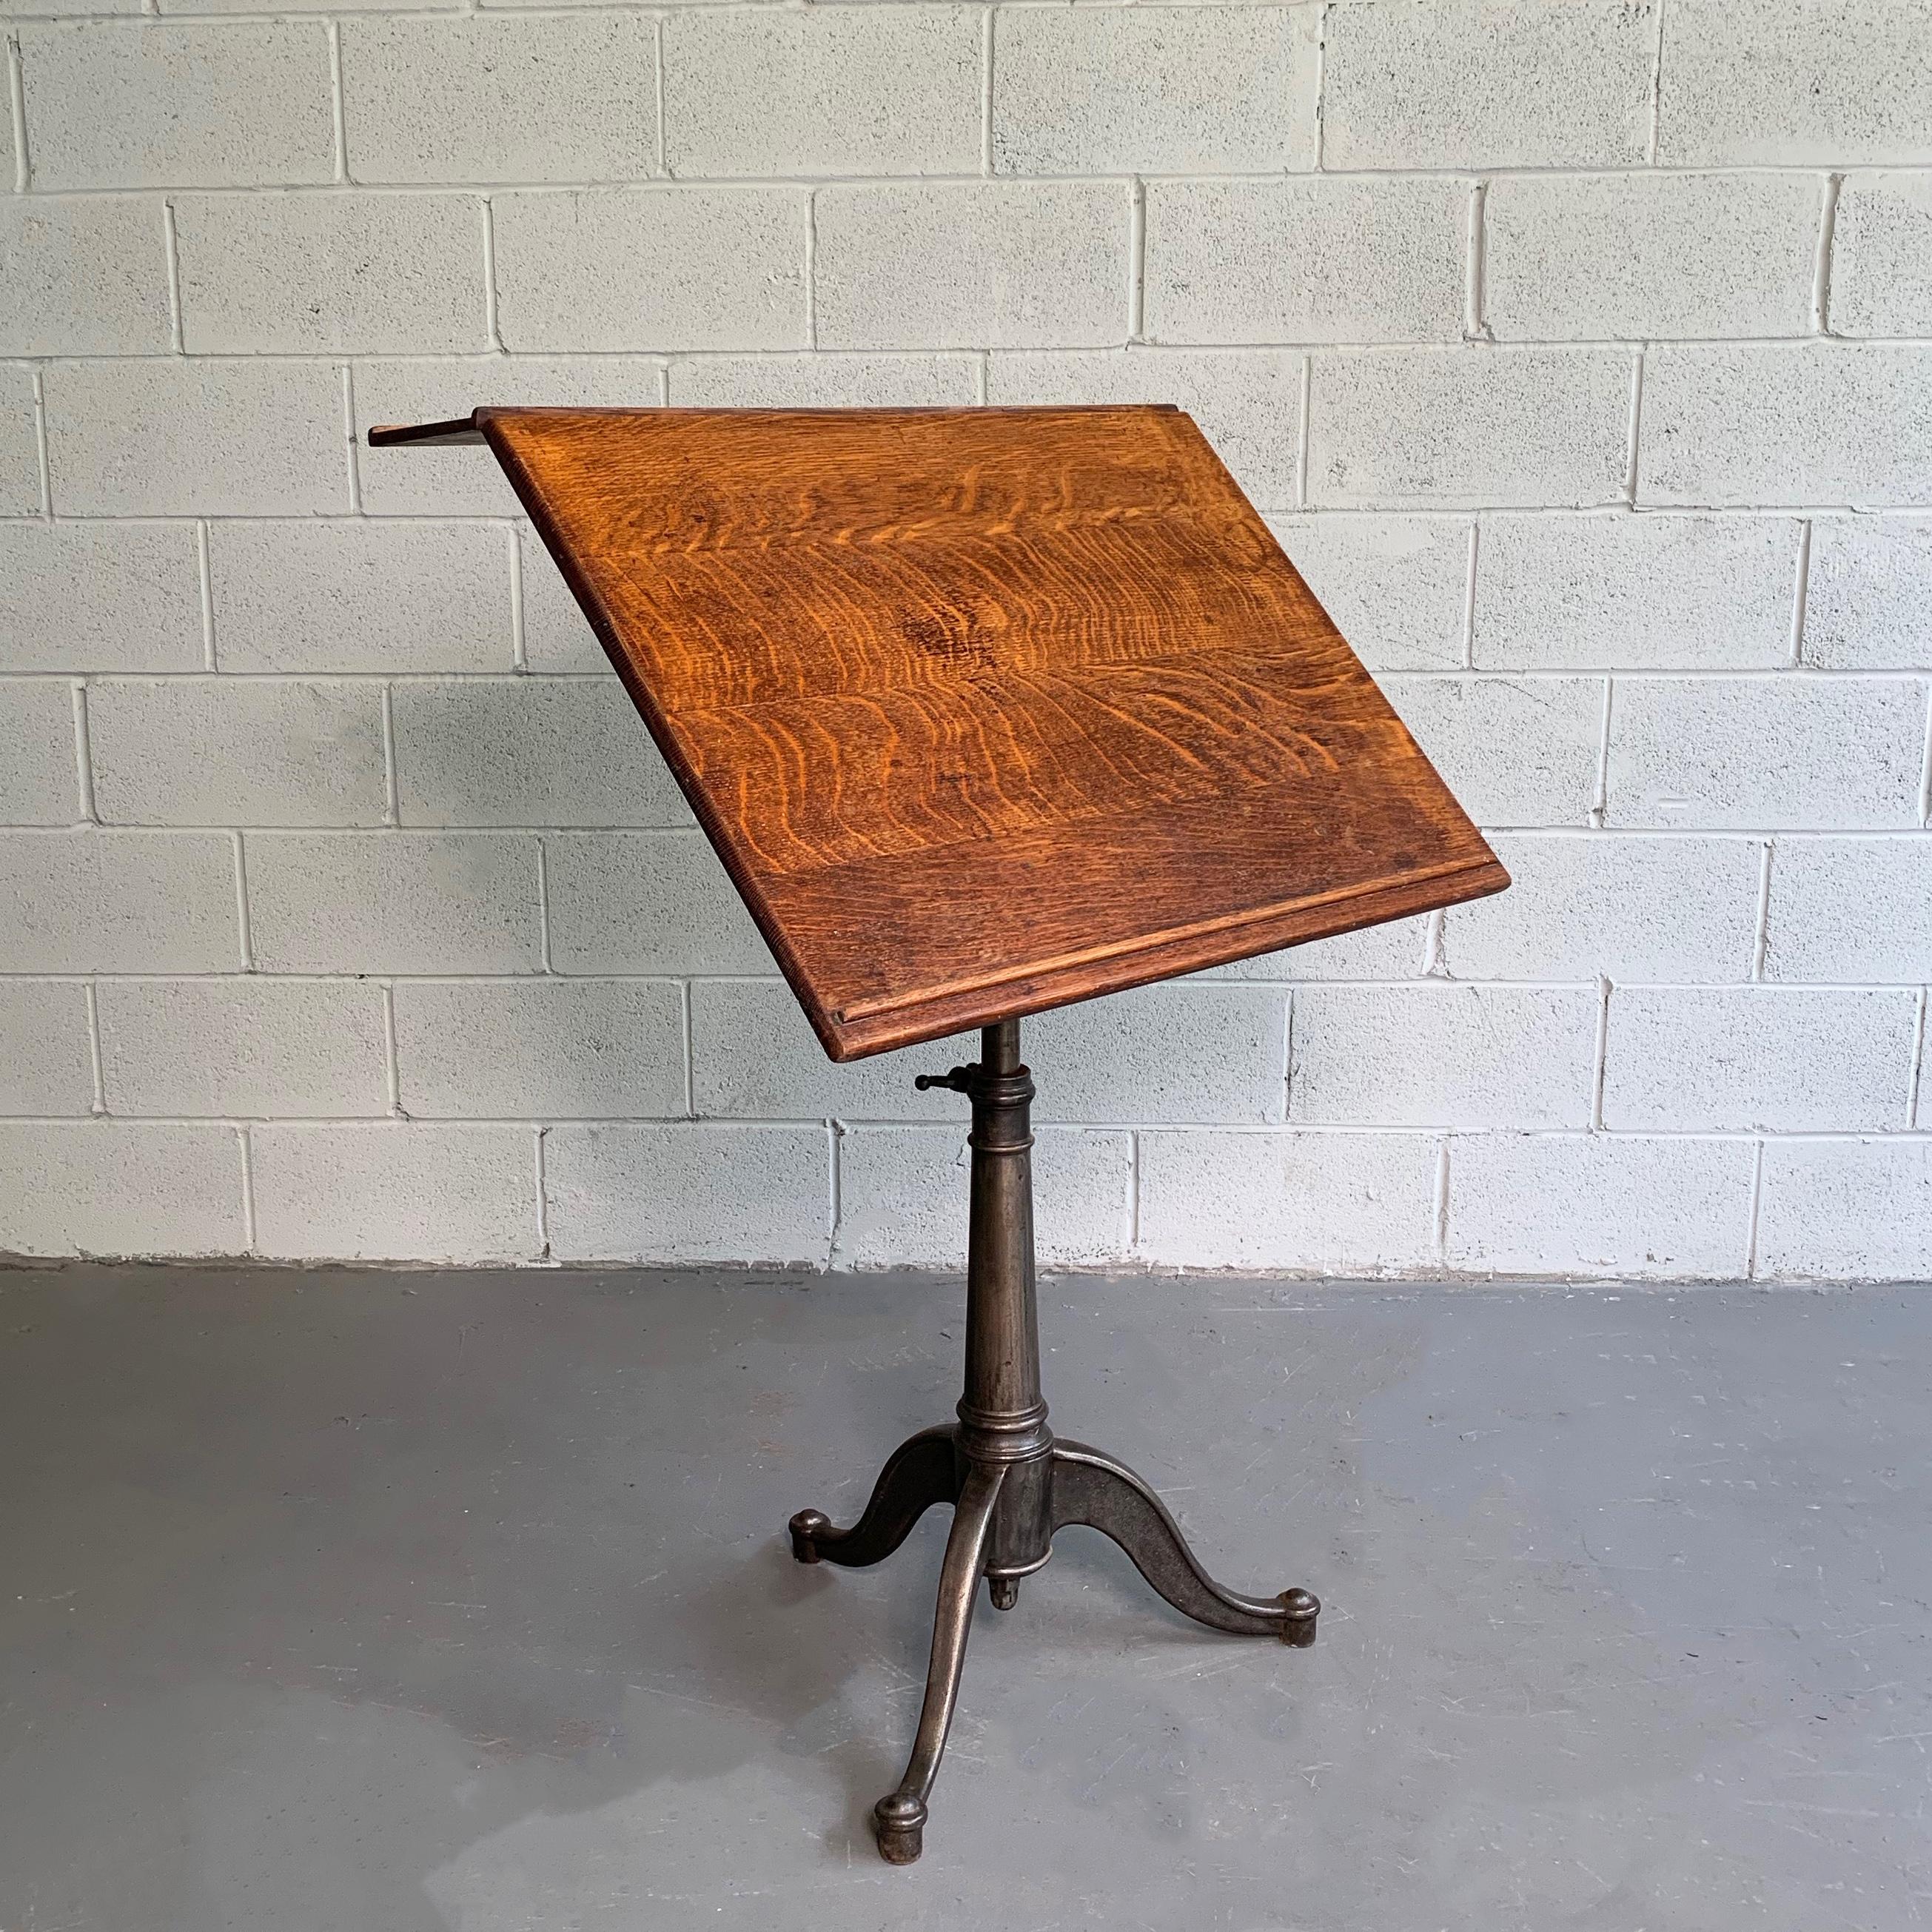 Large, antique, industrial, artist rendering easel table features an expandable, oak top from 22.5-29 inches with a 6.5 inch lip on a tilt and height adjustable cast iron pedestal base that adjusts from 29-40 inches height.